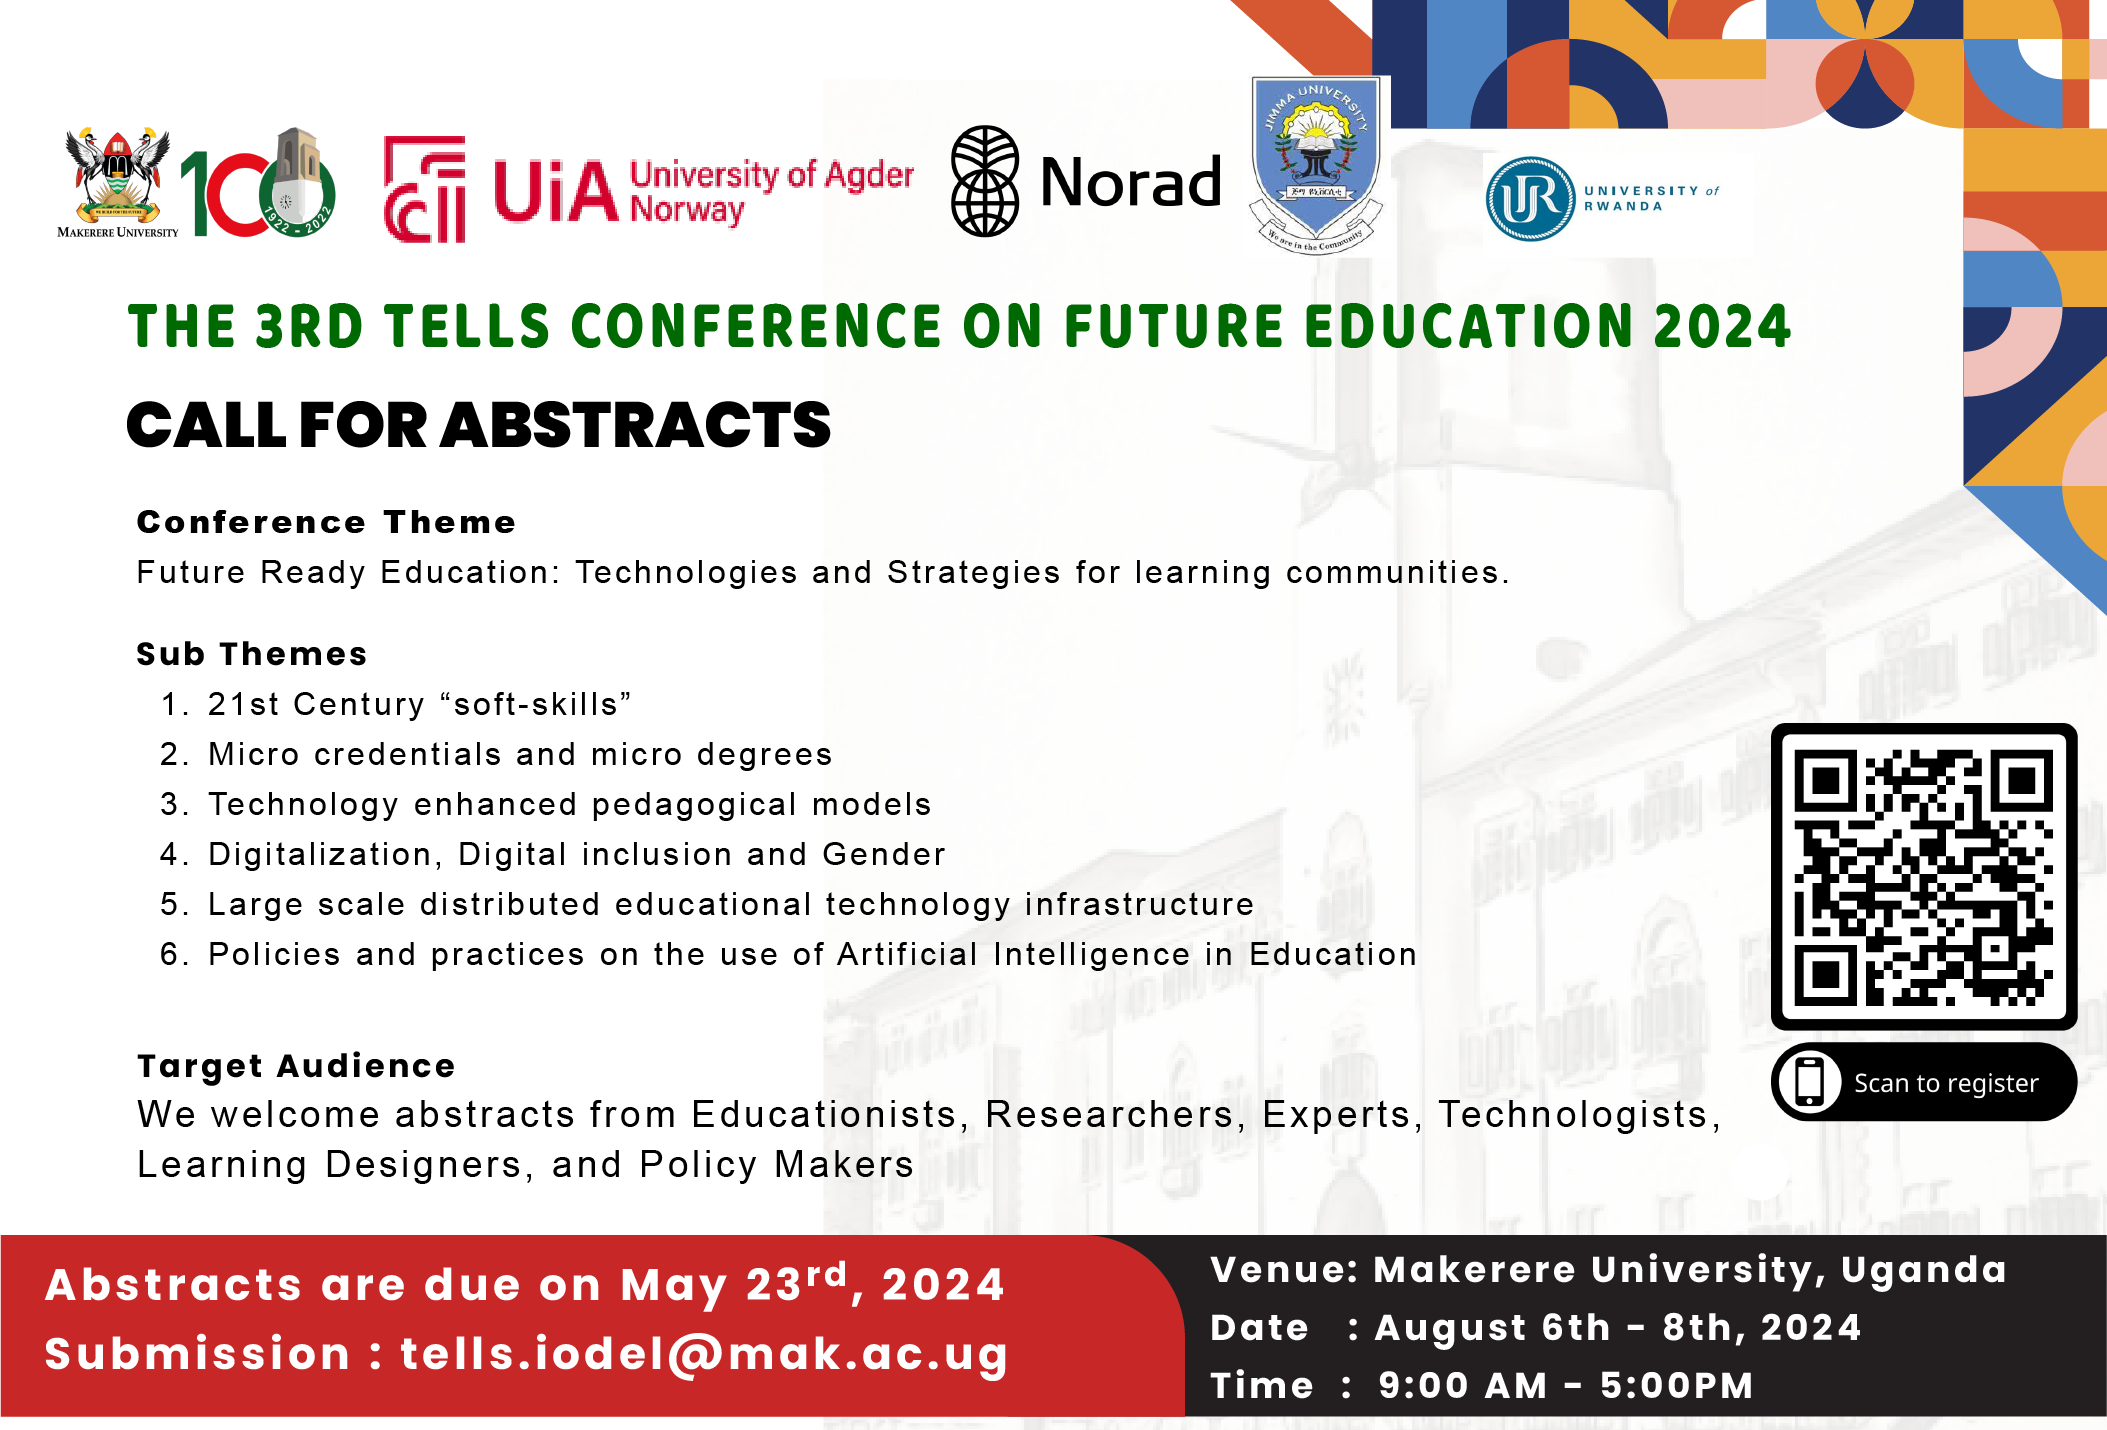 Call For Abstracts: 3rd TELLS Conference on Future Education 2024, 6th-8th August, 2024, Theme: "Future Ready Education: Technologies and Strategies for learning communities." Makerere University, Kampala Uganda, East Africa.